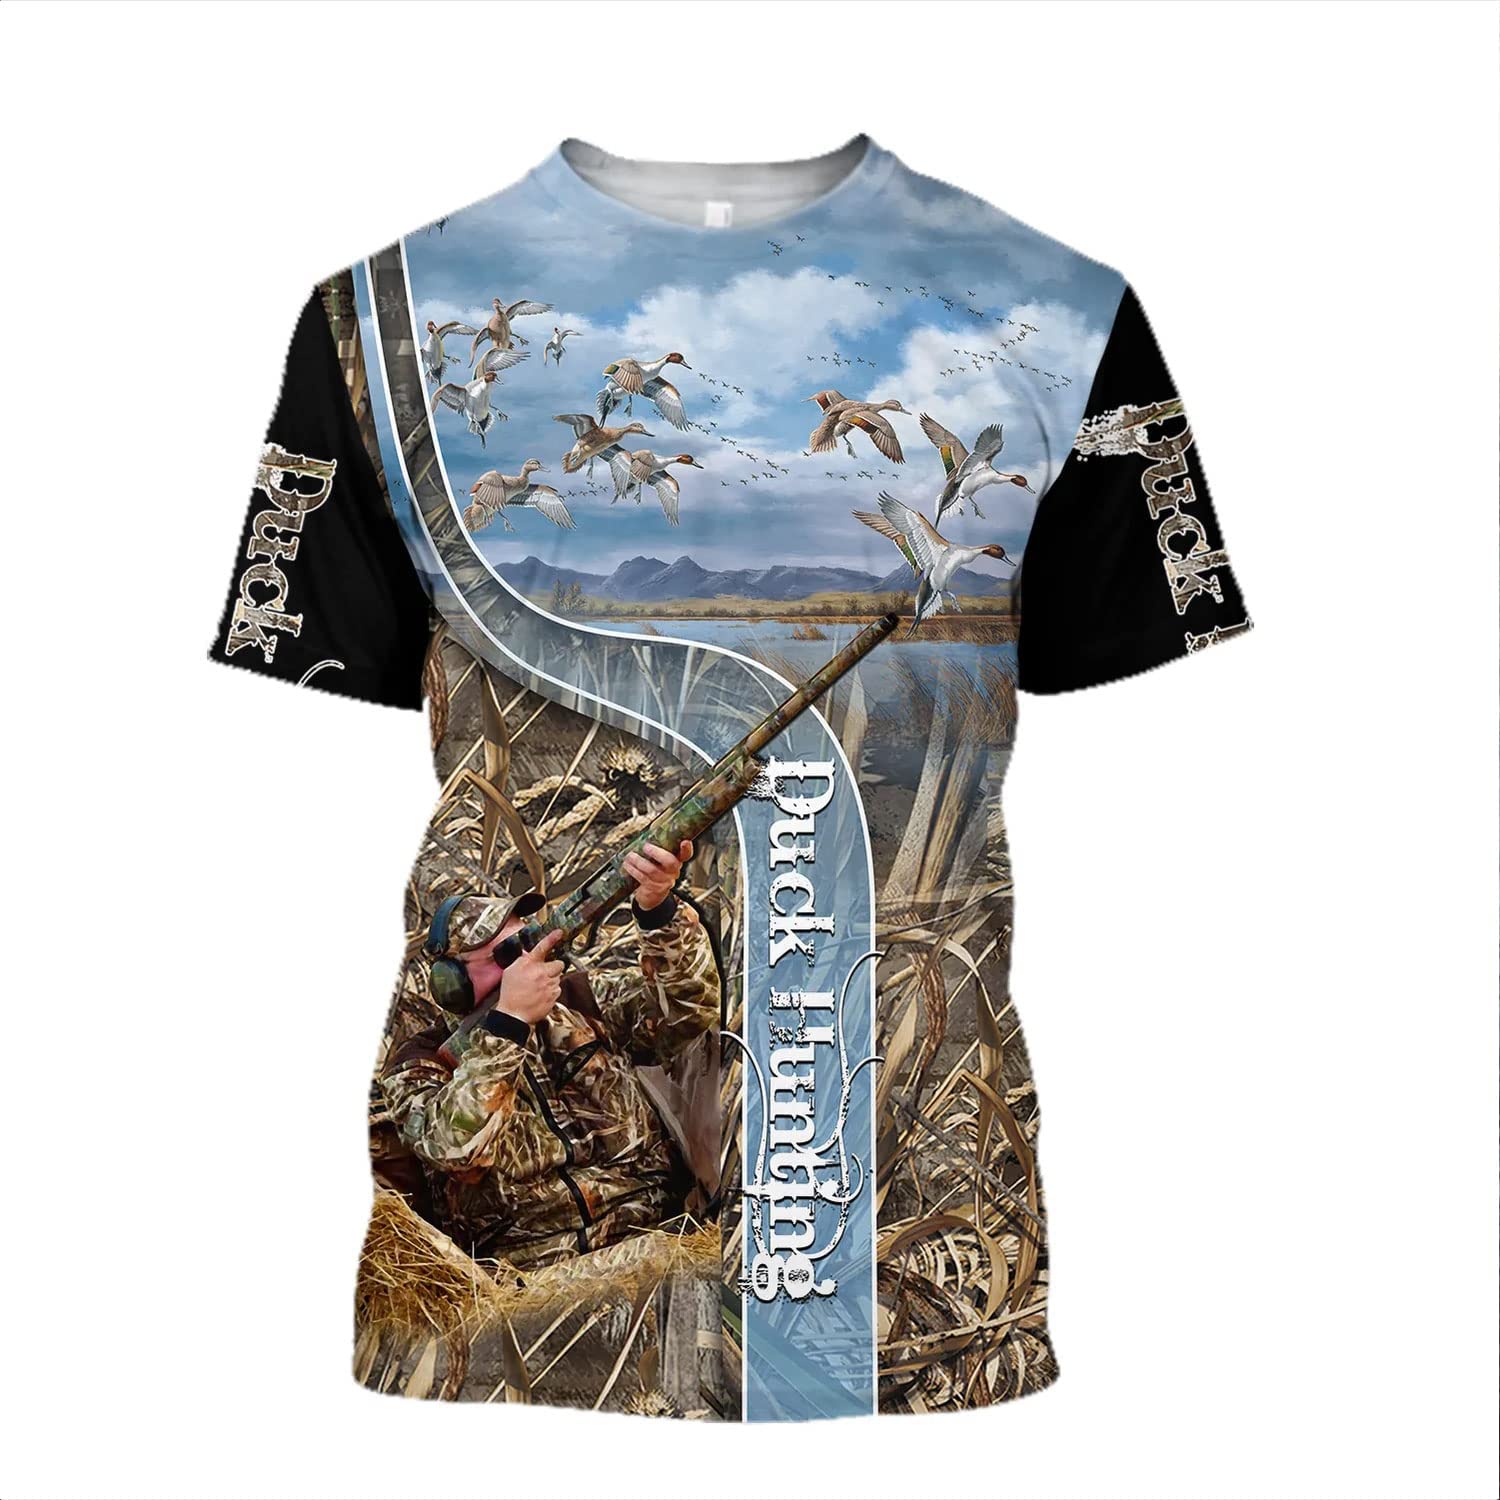 3d printed custom duck hunting shirt for animal hunting enthusiasts perfect gift for duck hunting lovers and families jot1434 pvhh1